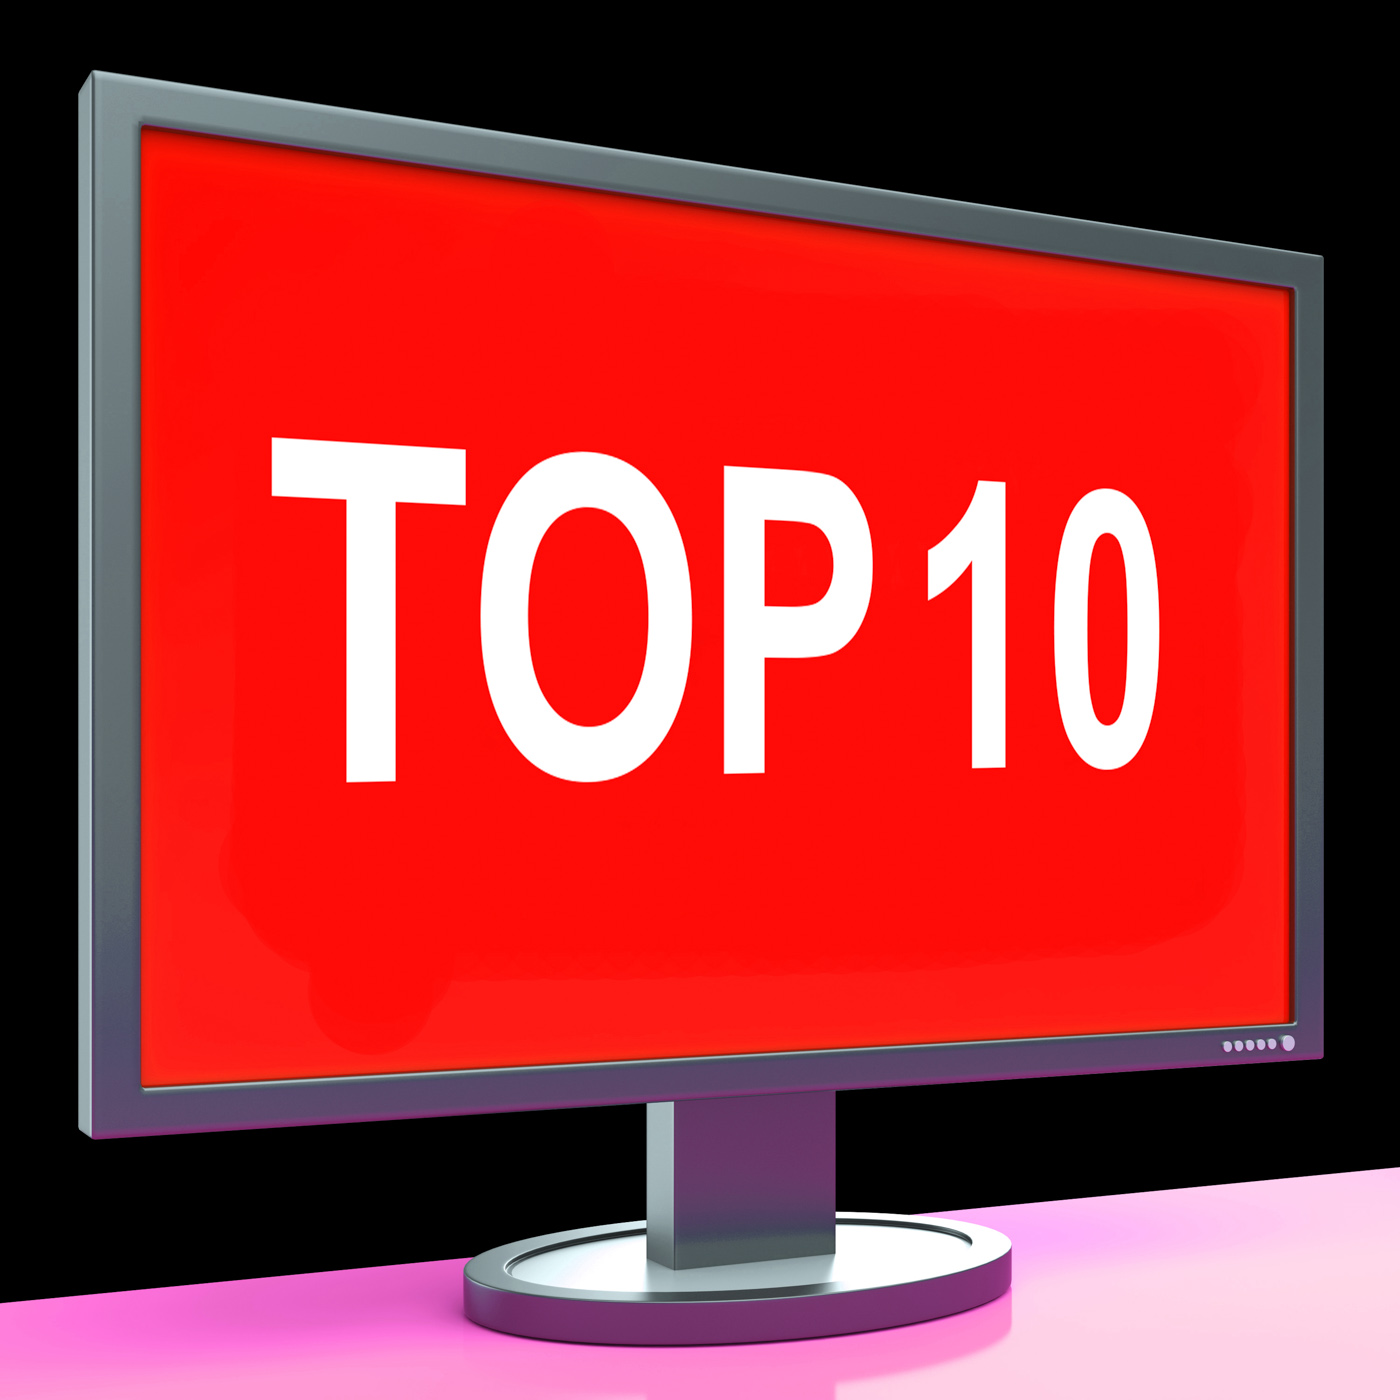 Top ten screen shows best ranking or rating photo